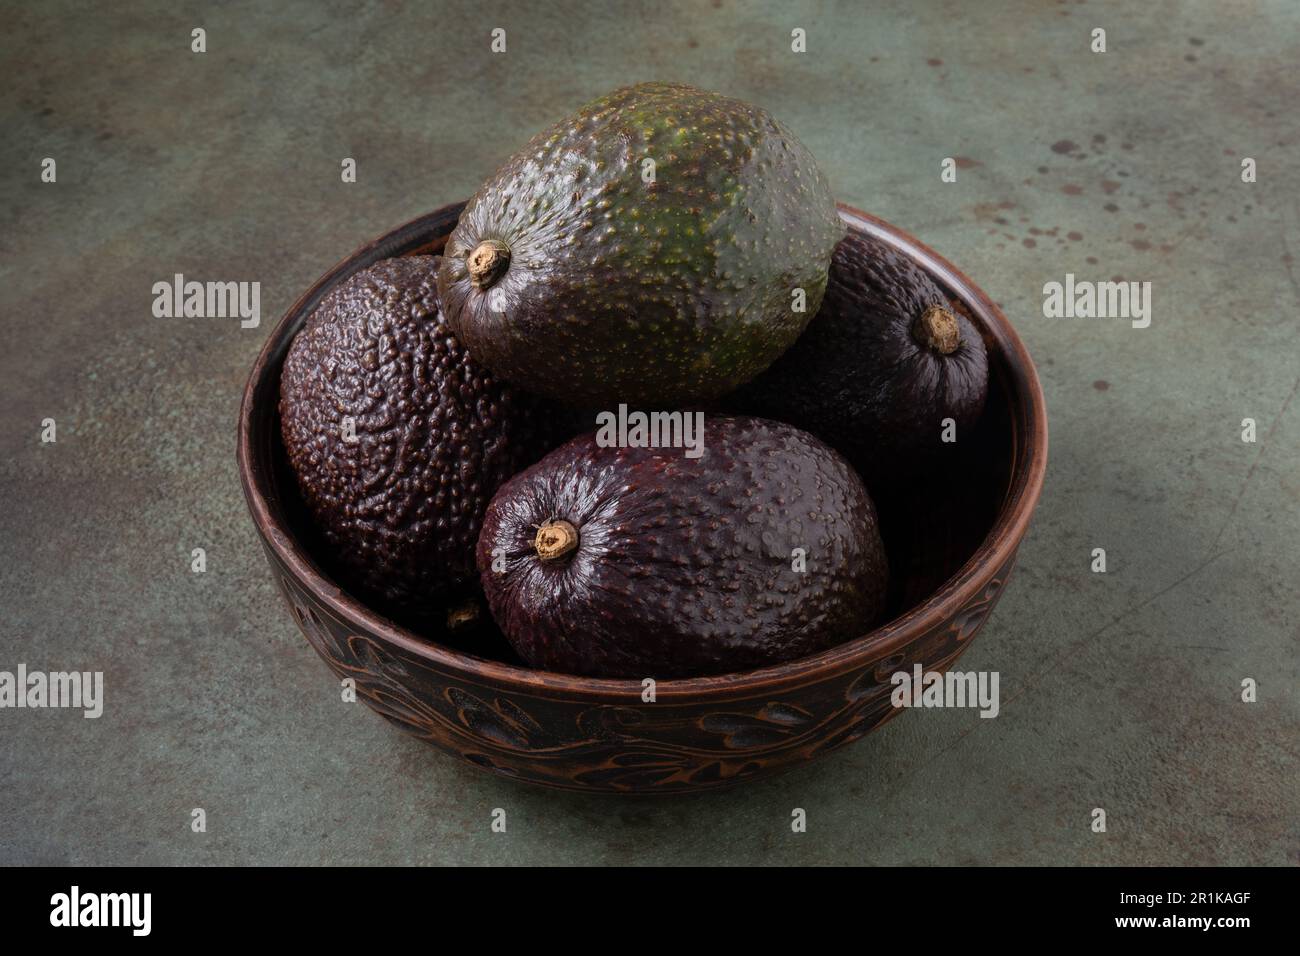 Several ripe avocados lie in a clay bowl. Stock Photo